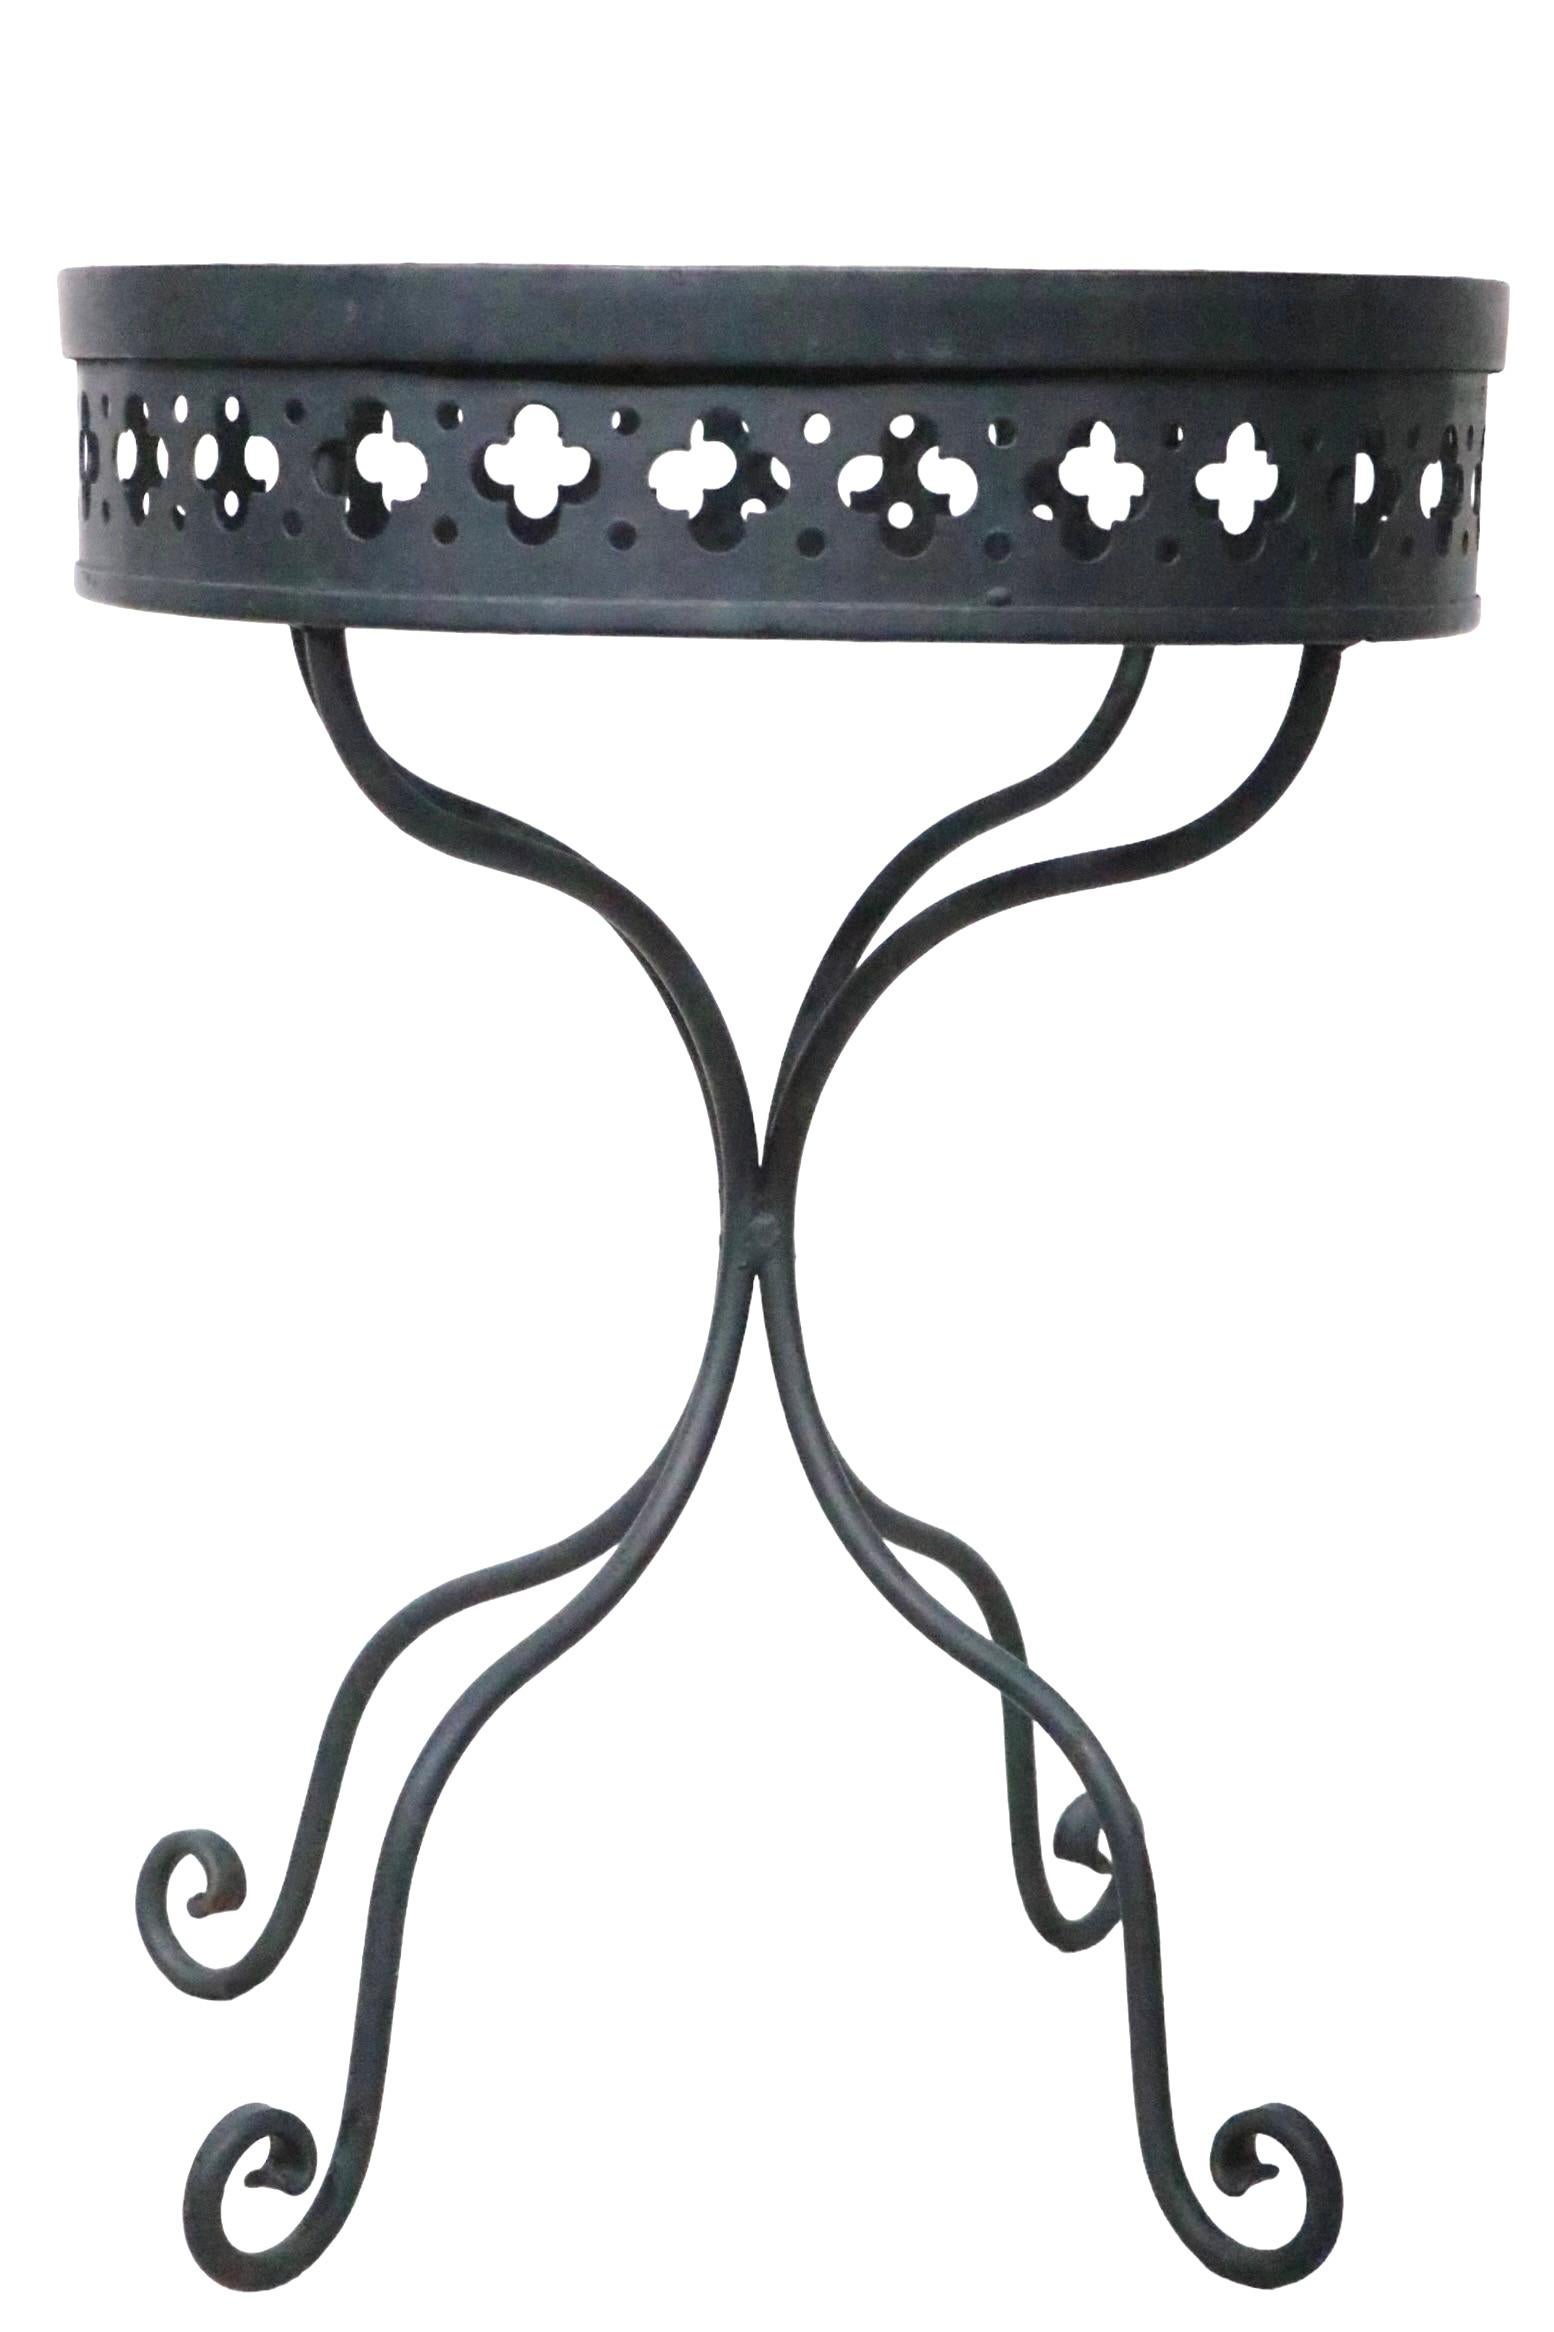 Wrought Iron and Metal Mesh Garden Patio Side End Table Taj Mahal by Salterini For Sale 1